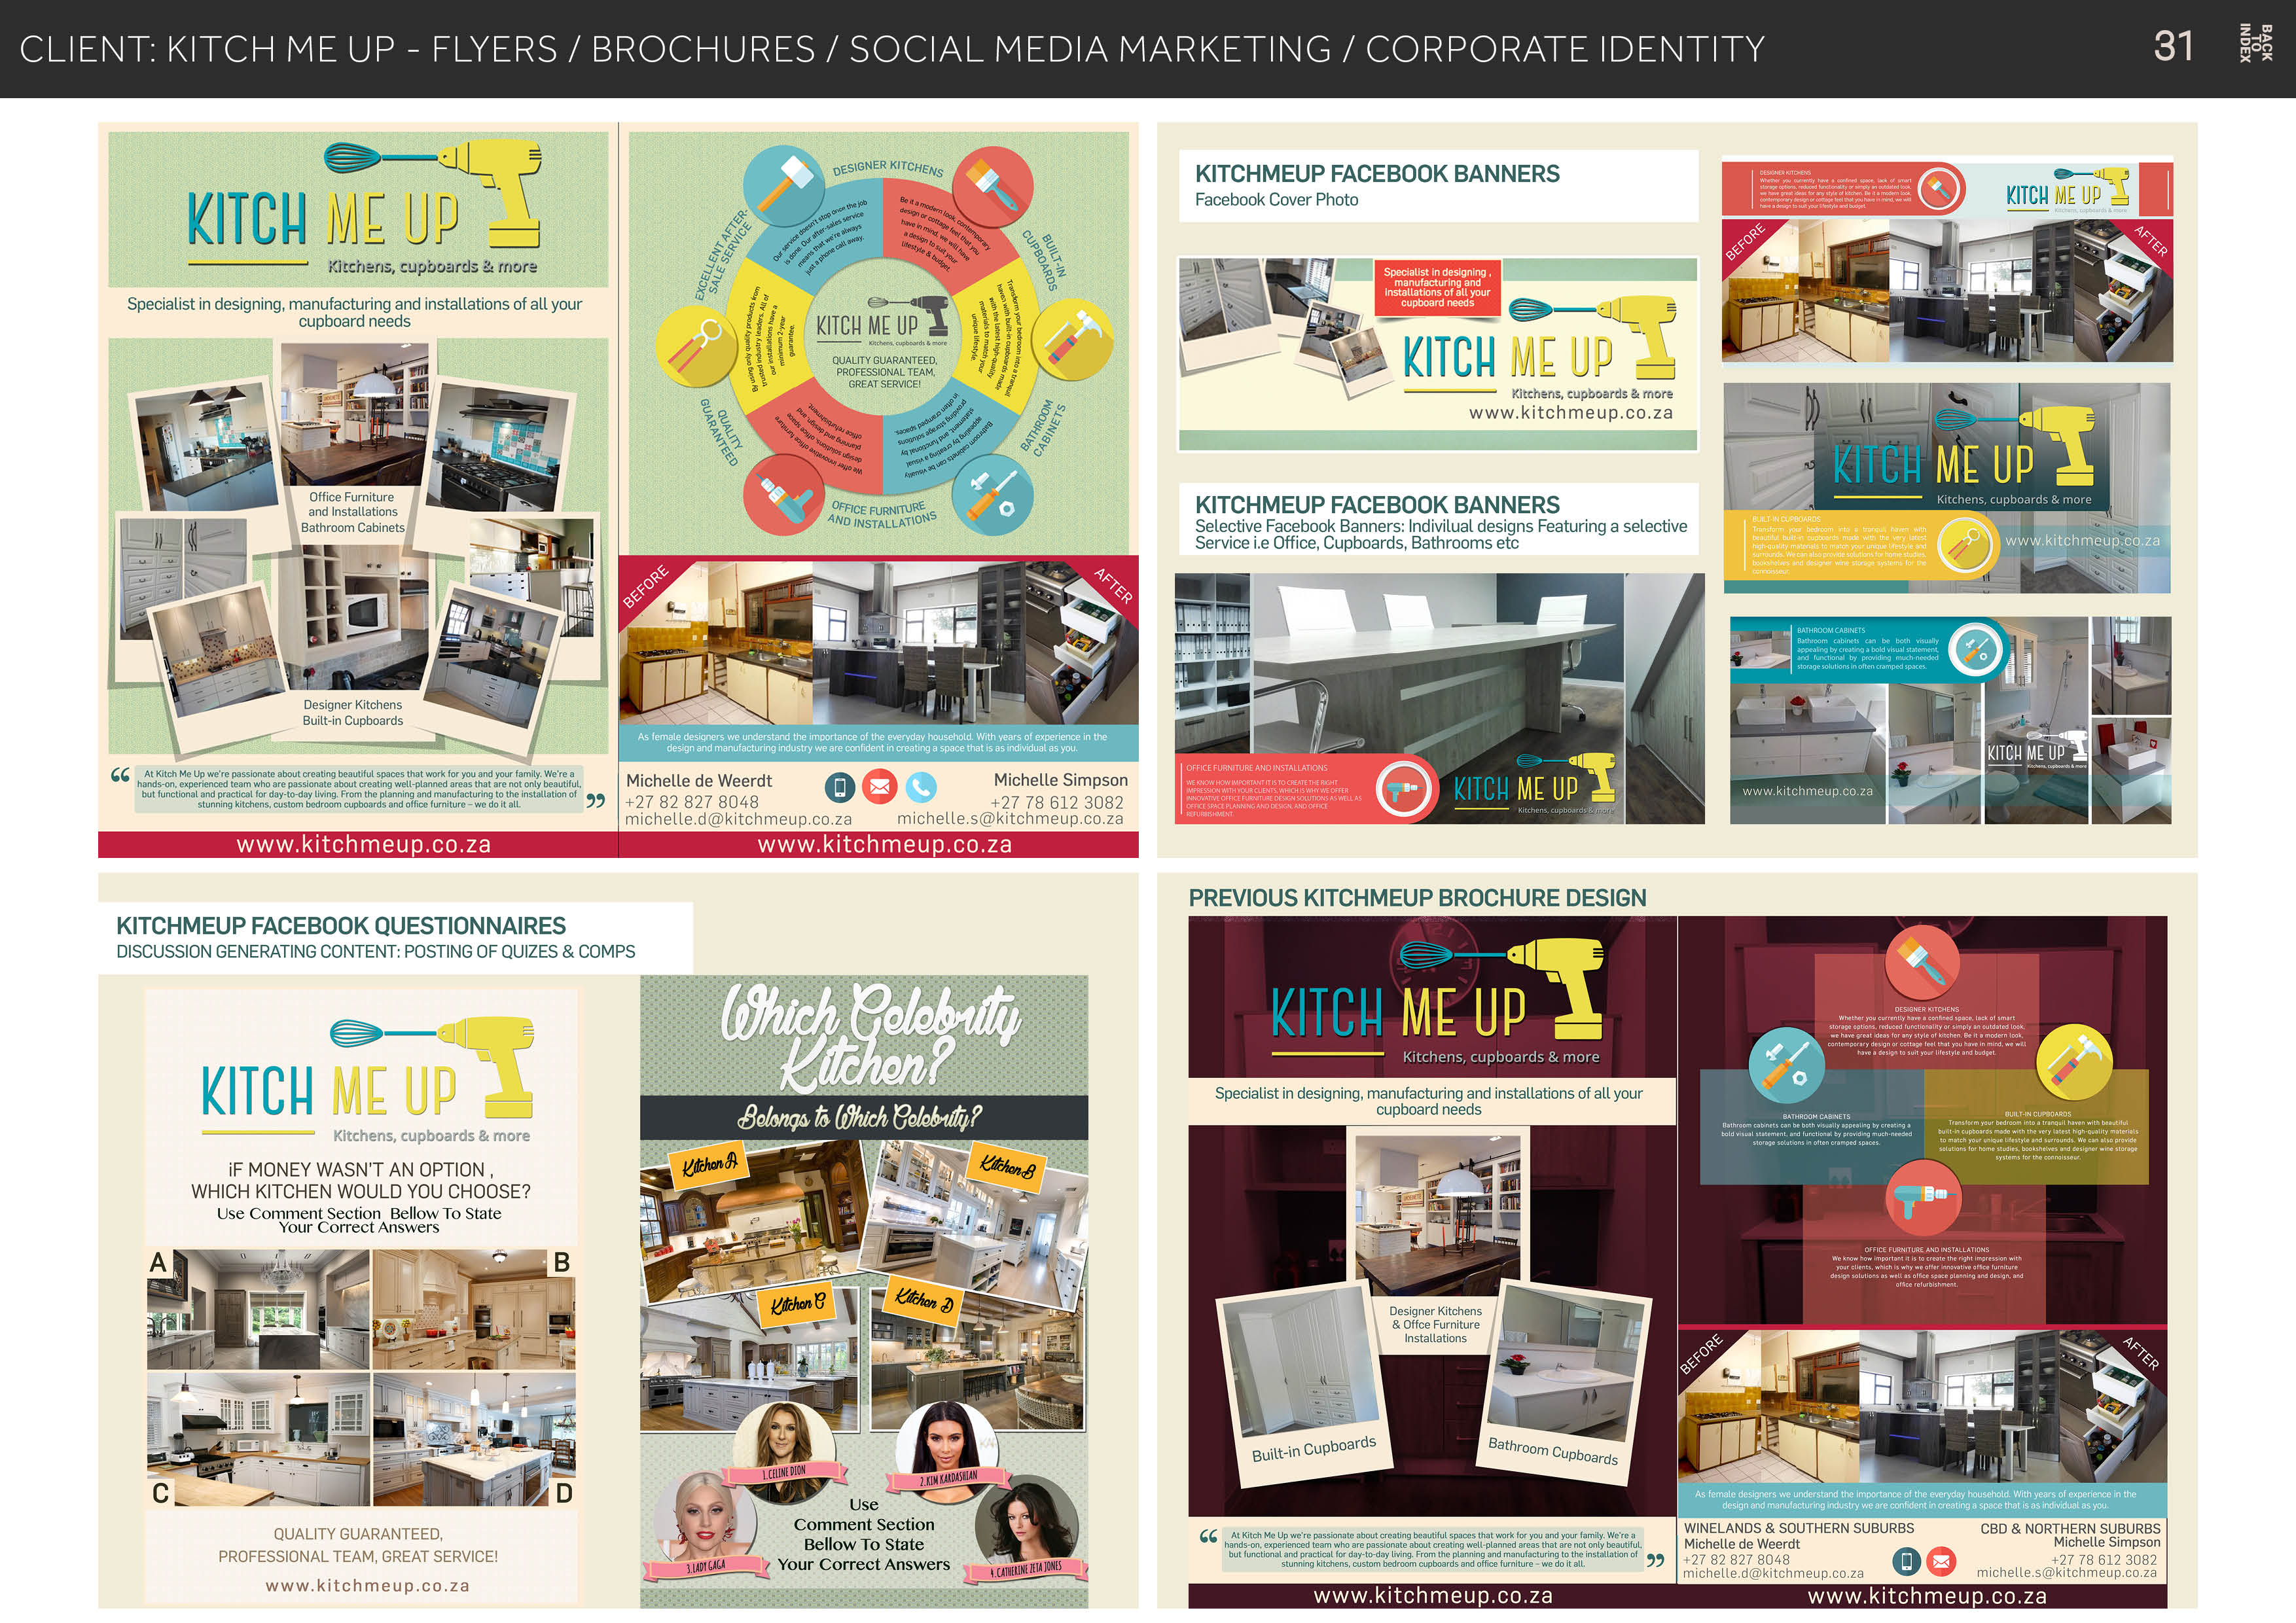 CLIENT: KITCH ME UP - FLYERS / BROCHURES / SOCIAL MEDIA MARKETING / CORPORATE IDENTITY

 

   
     

S—_
ME Up 2 =

rds & more

QESIONER KITCHEy

arch |

Kitchens, cup

 

     
 

GREAT SERVICE!

£5 1 13 2
Specialist in designing, manufacturing and installations of all your + i 3 - 1 13
: if) 131 /
cupboard needs HH KITCH ME up ih
s 8 - §
V7 till QUALITY GUARANTE i431 7
£1 PROFESSIONAL TEAM, if $y

 
 

OFFICE pyrNTTURE
AND INSTALLATIONS

    
 
 

 

  
 

Designer Kitchens
Built-in Cupboards

www.kitchmeup.co.za

KITCHMEUP FACEBOOK QUESTIONNAIRES
DISCUSSION GENERATING CONTENT: POSTING OF QUIZES & COMPS

Ep

KITCH

iF MONEY WASN'T AN OPTION ,
WHICH KITCHEN WOULD YOU CHOOSE?

Use Comment Section Bellow To State
Your Correct Answers

 

Comment Section
Bellow To State
7 Your Correct Answers

QUALITY GUARANTEED
PROFESSIONAL TEAM, GREAT SERVICE!

 

www.kitchmeup.co.za

 

KITCHMEUP FACEBOOK BANNERS

Facebook Cover Photo

Ele.
= Neri

Kitchens, cupboards & mo

www.kitchmeup.co.za

 

re

 

KITCHMEUP FACEBOOK BANNERS
Selective Facebook Banners: Indivilual designs Featuring a selective
Service i.e Office, Cupboards, Bathrooms etc

     
 

 

EST TEER VE
rt

10 Gua
re beret
ERs
x

 

PREVIOUS KITCHMEUP BROCHURE DESIGN

Kitchens i & more

Specialist in designing, manufacturing and installations of all your
cupboard needs

Designer Kitchens
& Offce Furniture
stallations

CBD & NORTHERN SUBURBS
Michelle Simpson

(0 =) Fae
0.28 1 s@kitchrmeup.co.za

www. kitchmeup.co.za

WINELANDS & SOUTHERN SUBURBS
Michelle de Weerdt

 

www. kitchmeup.co.za